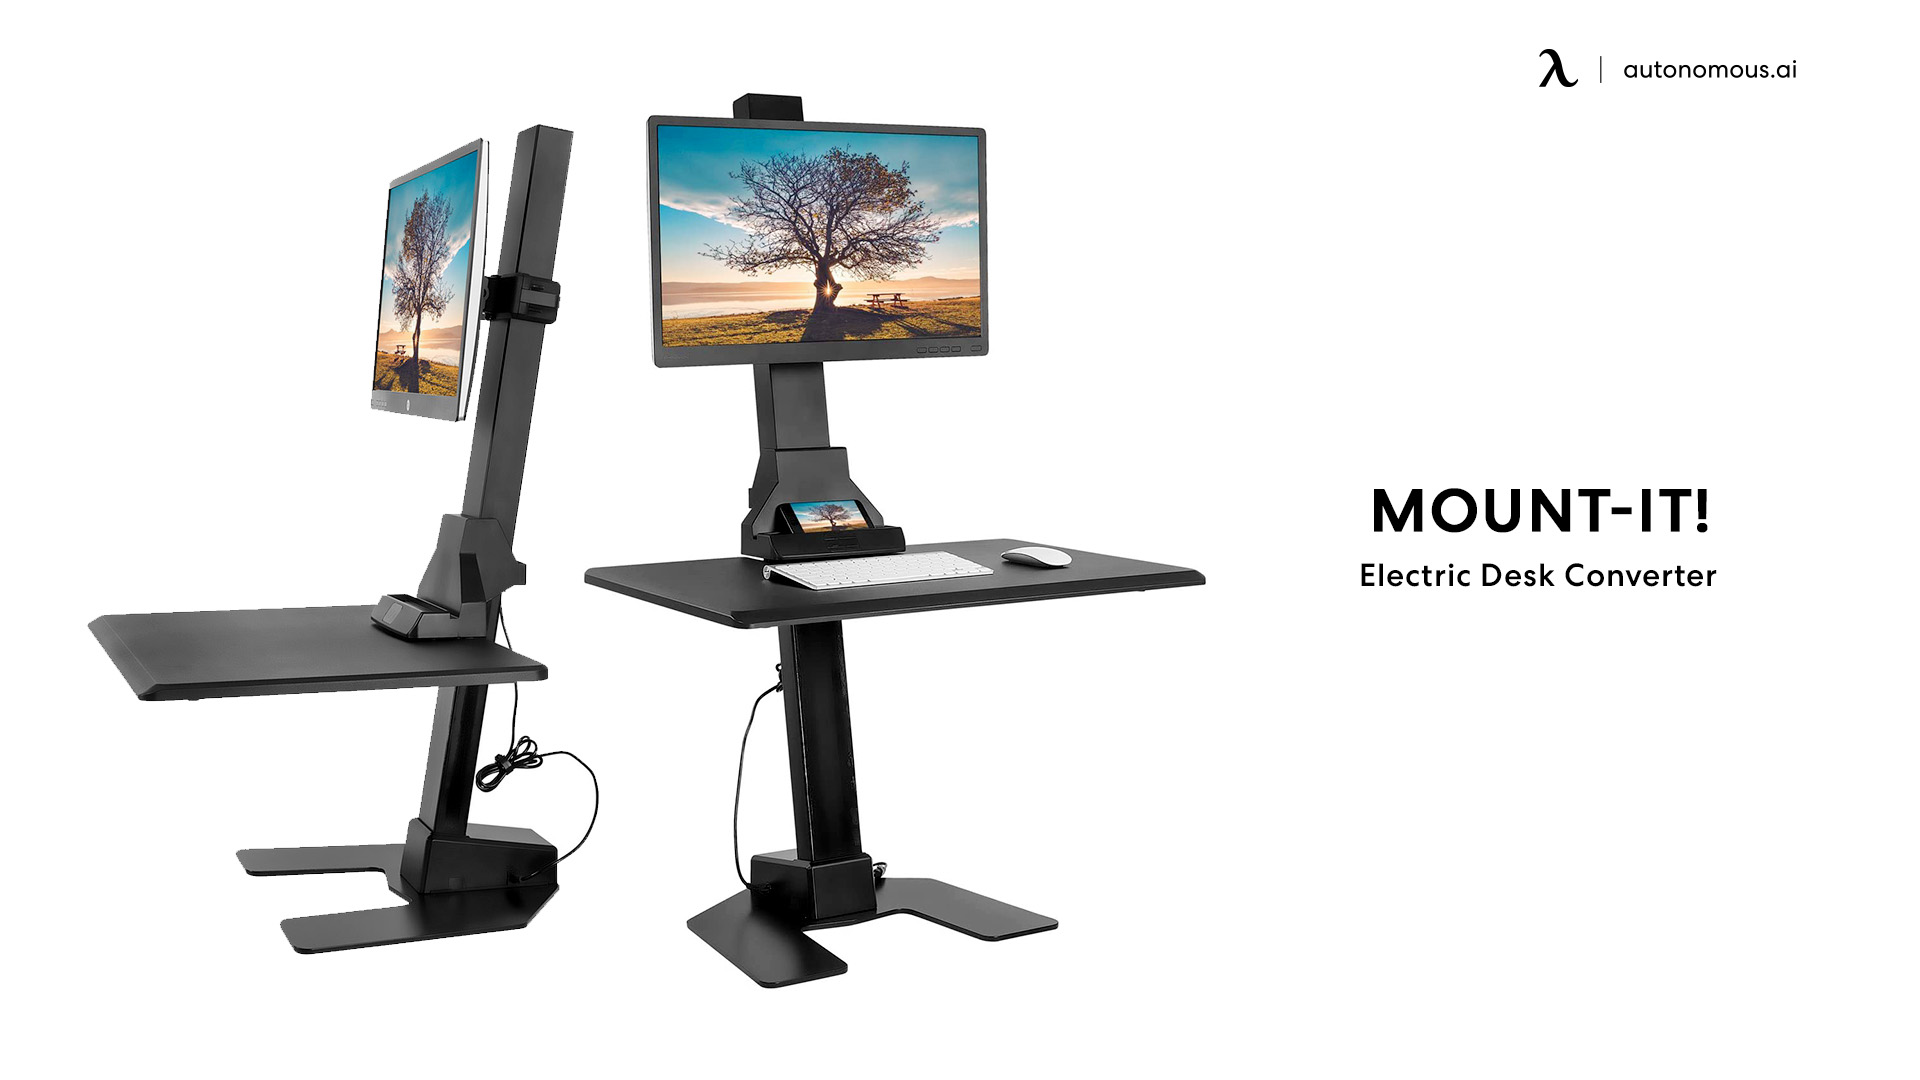 small standing desk converter by Mount-It!